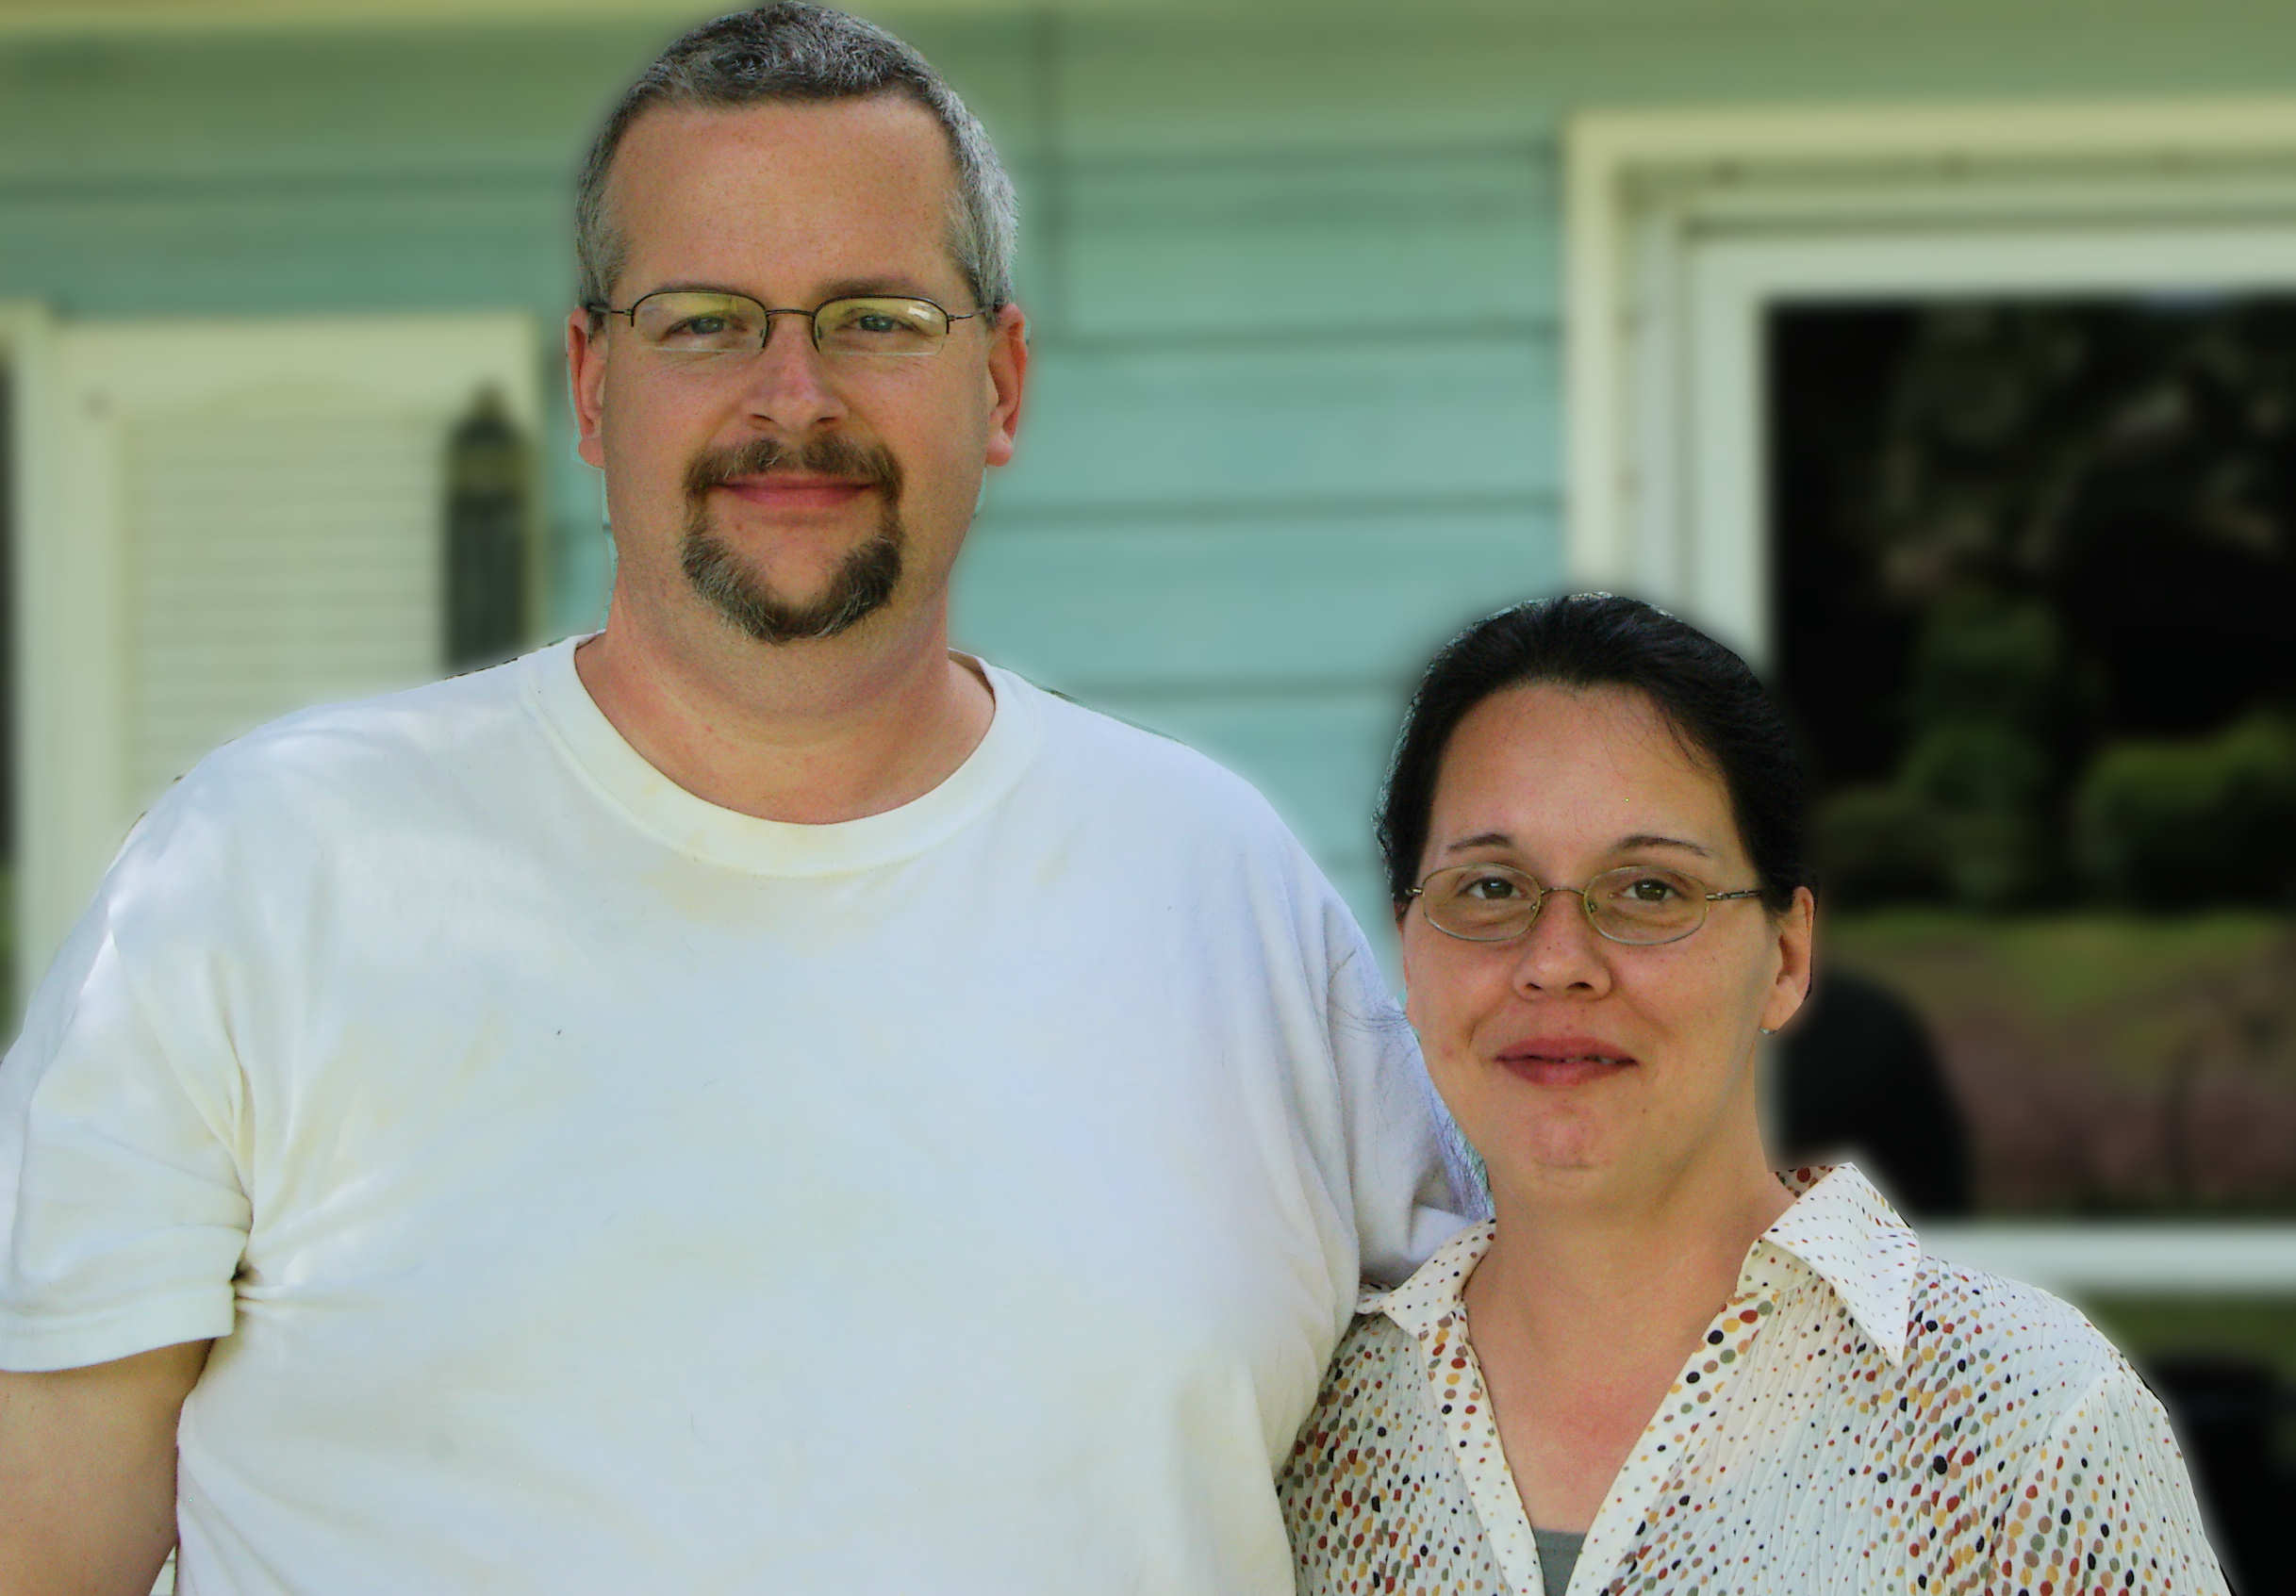 Richard and Renee, Ministers of Sowing Seeds